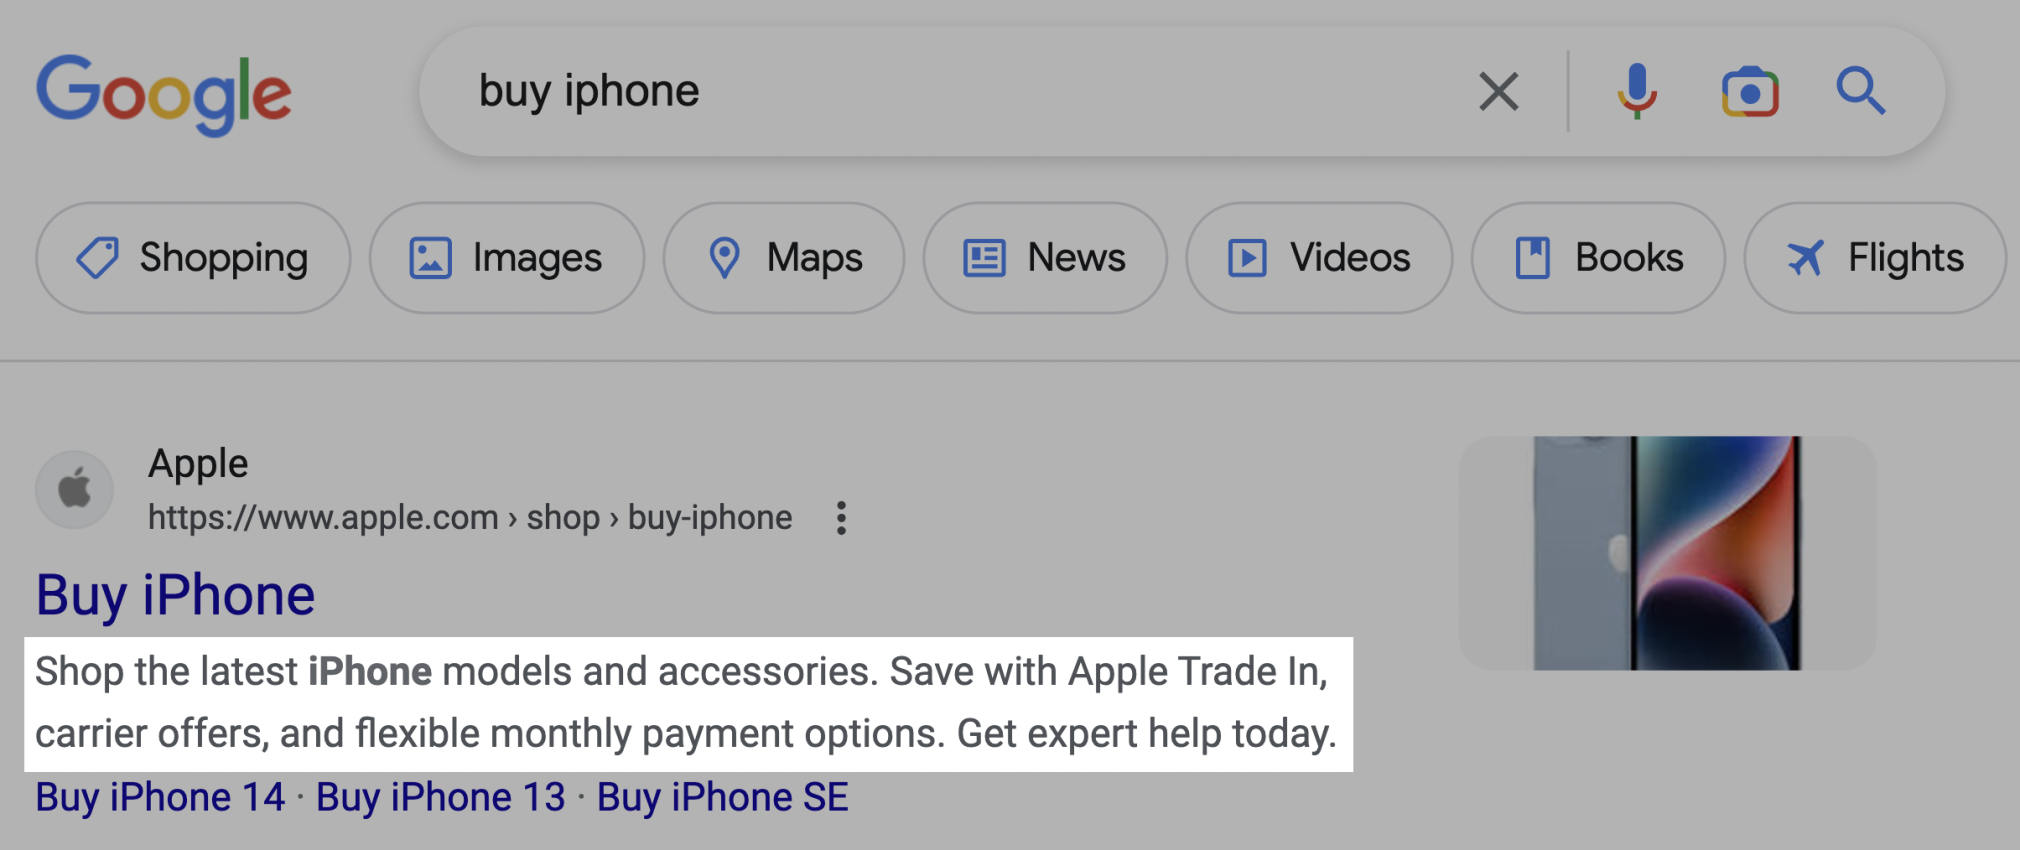 Search engine results page for buy iphone, highlighting the meta description